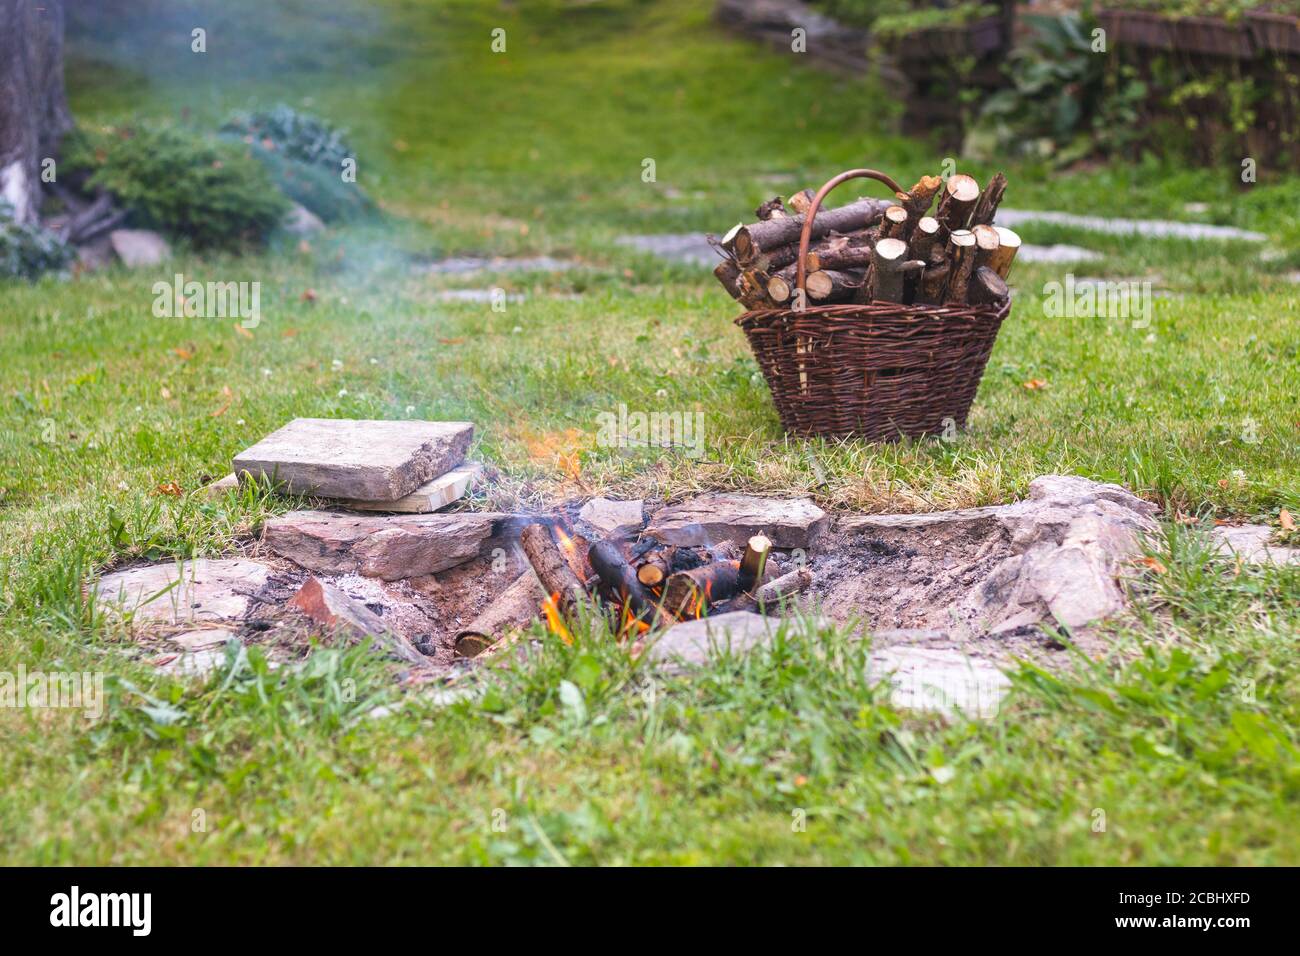 camp fire in the garden, next to a basket with firewood Stock Photo